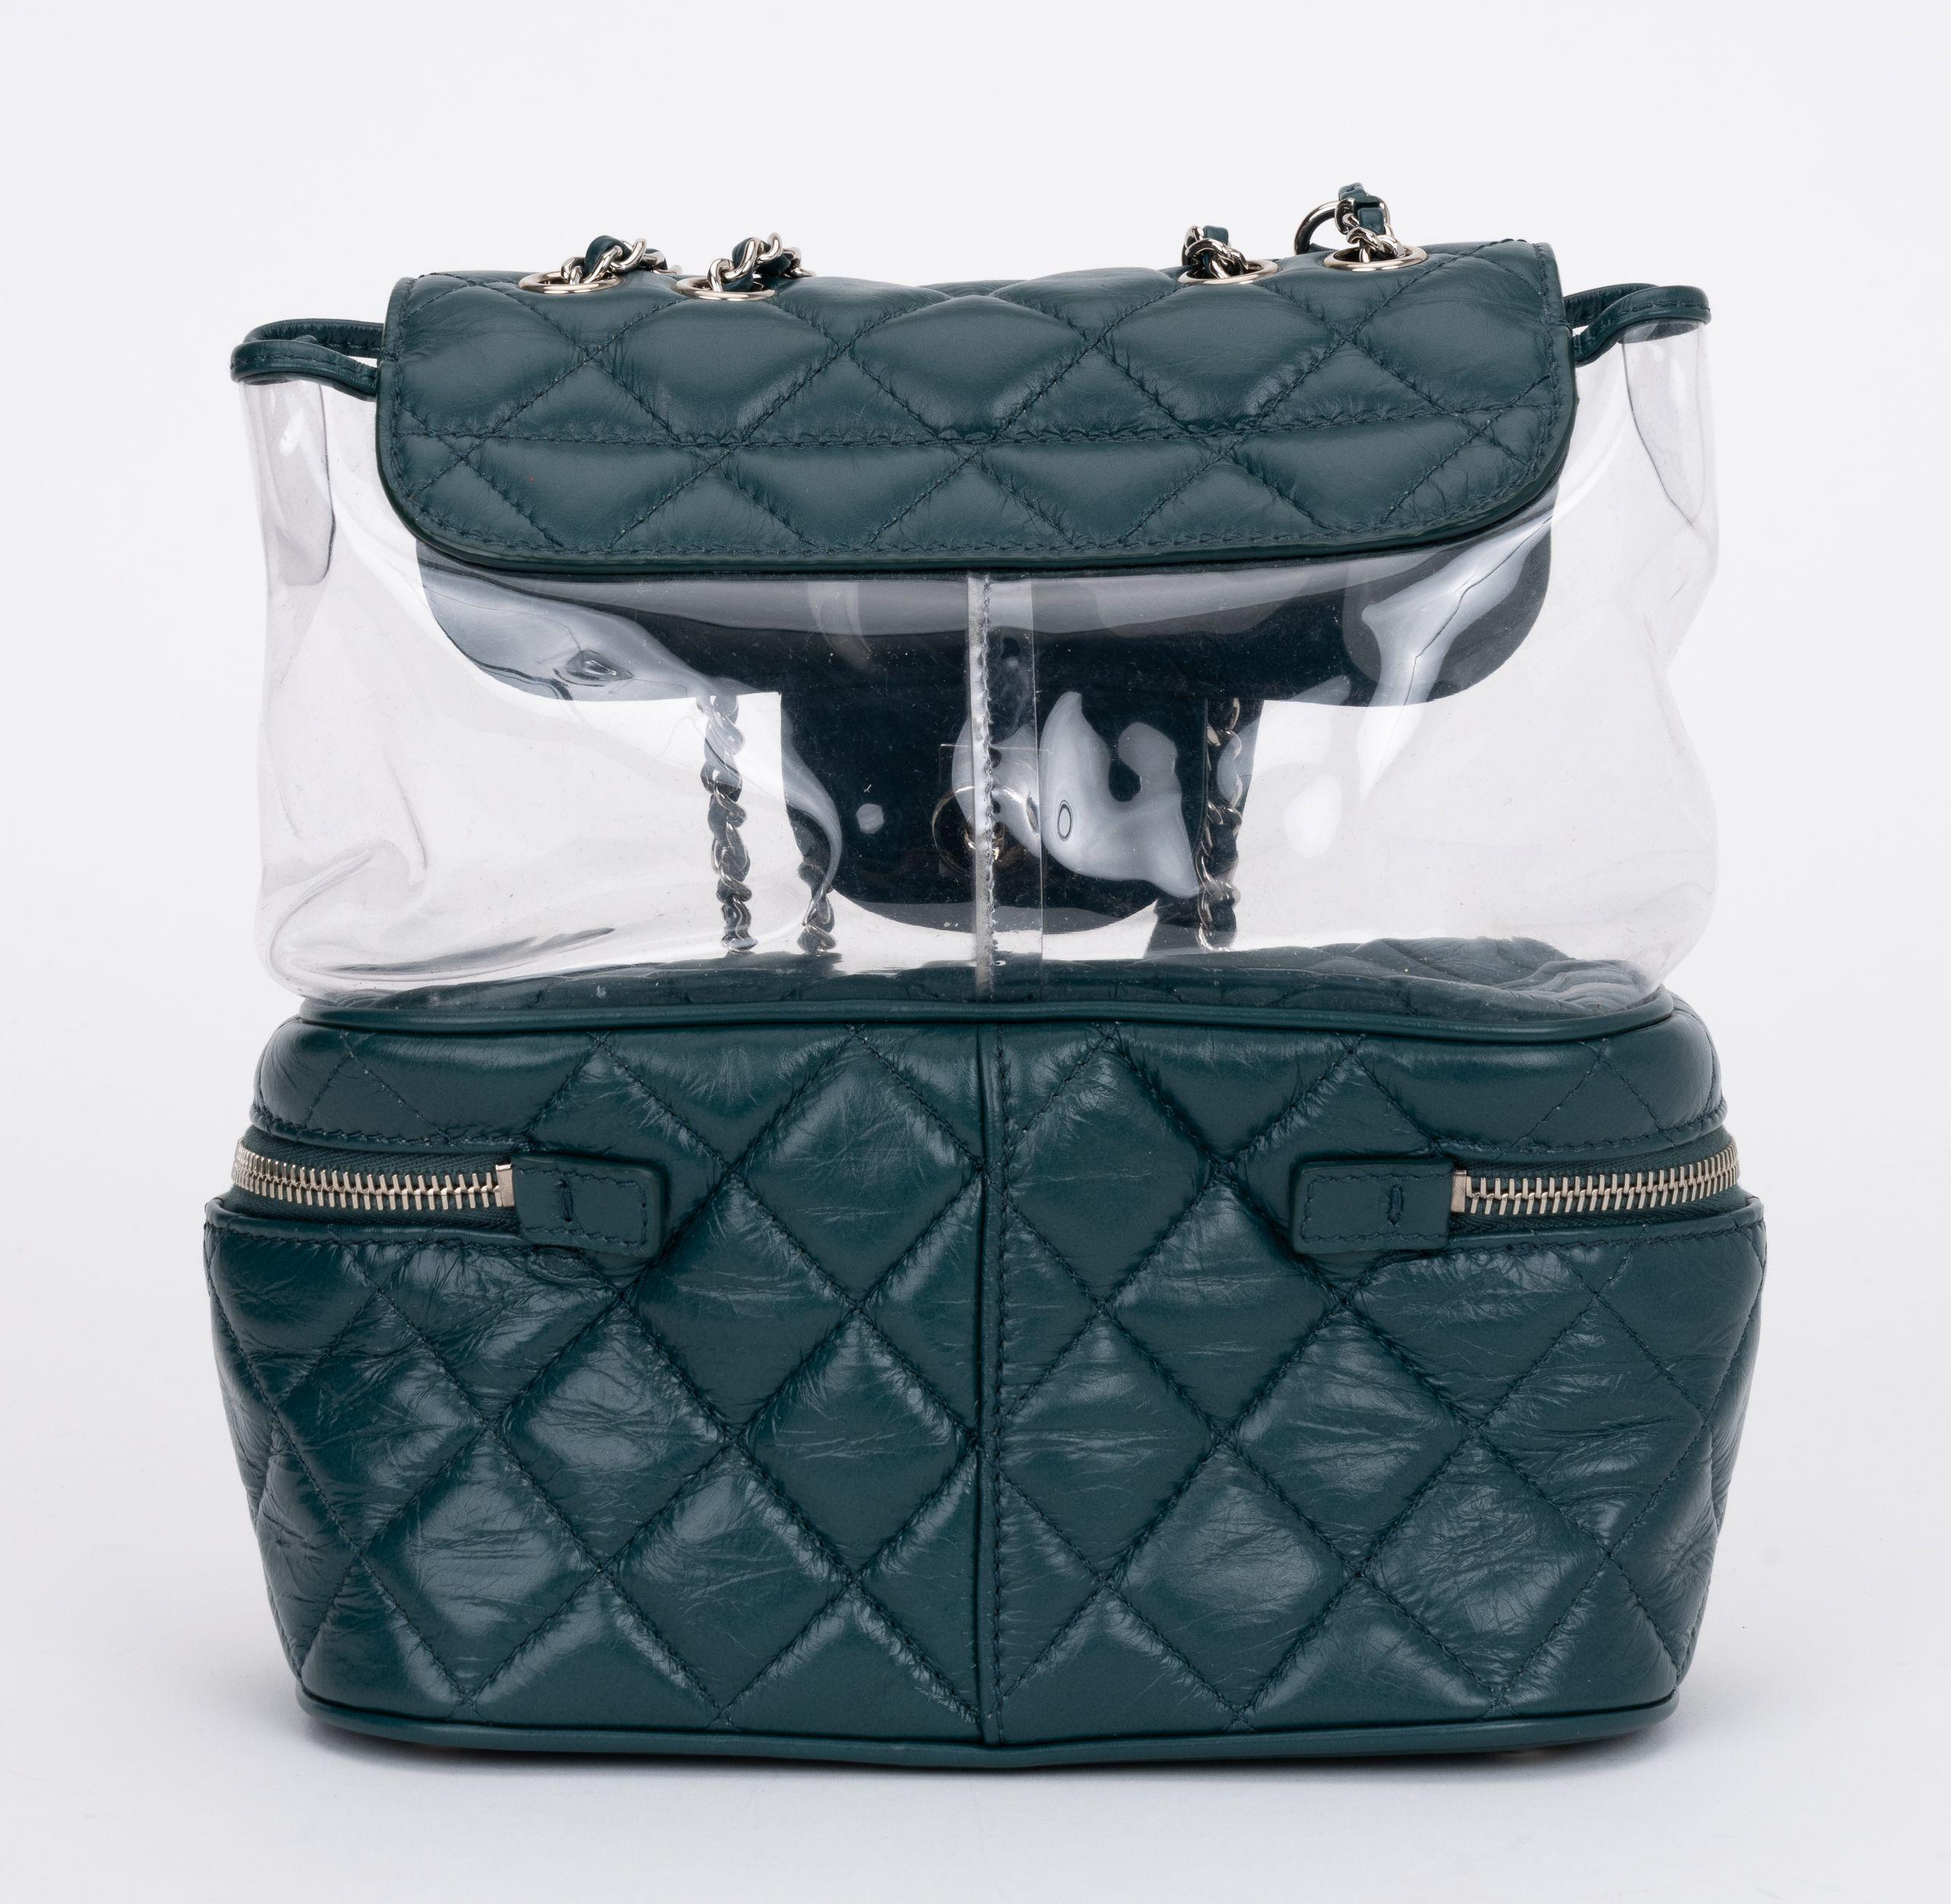 Chanel 2 way green pvc collectible bag. Shoulder tote or cross body. Collection 25.Shoulder drop 9